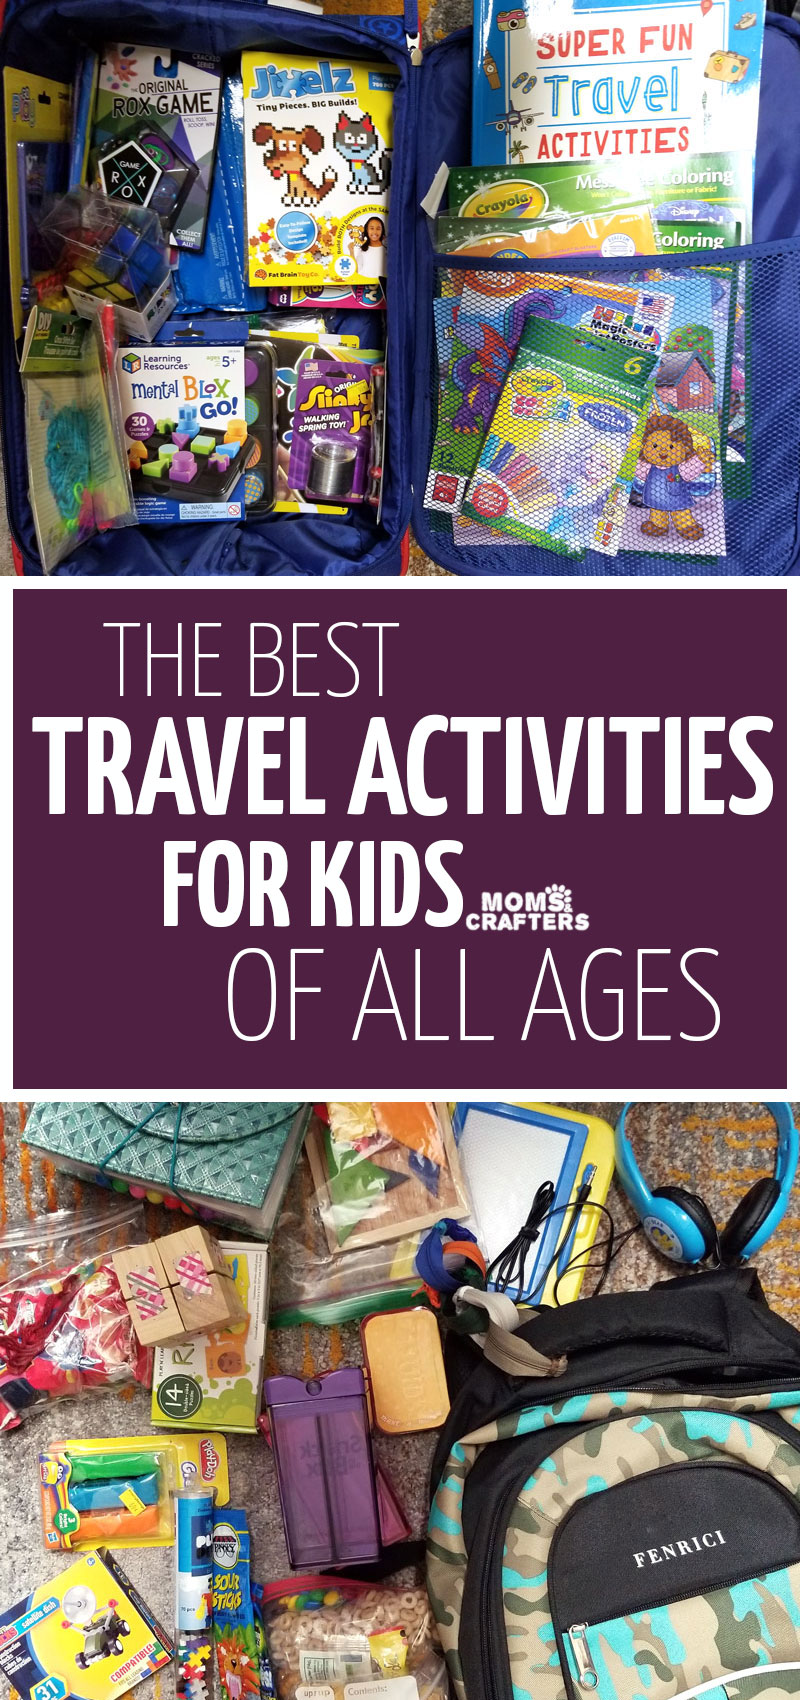 Packing For Long Flights With Kids and Teens - Priya Creates